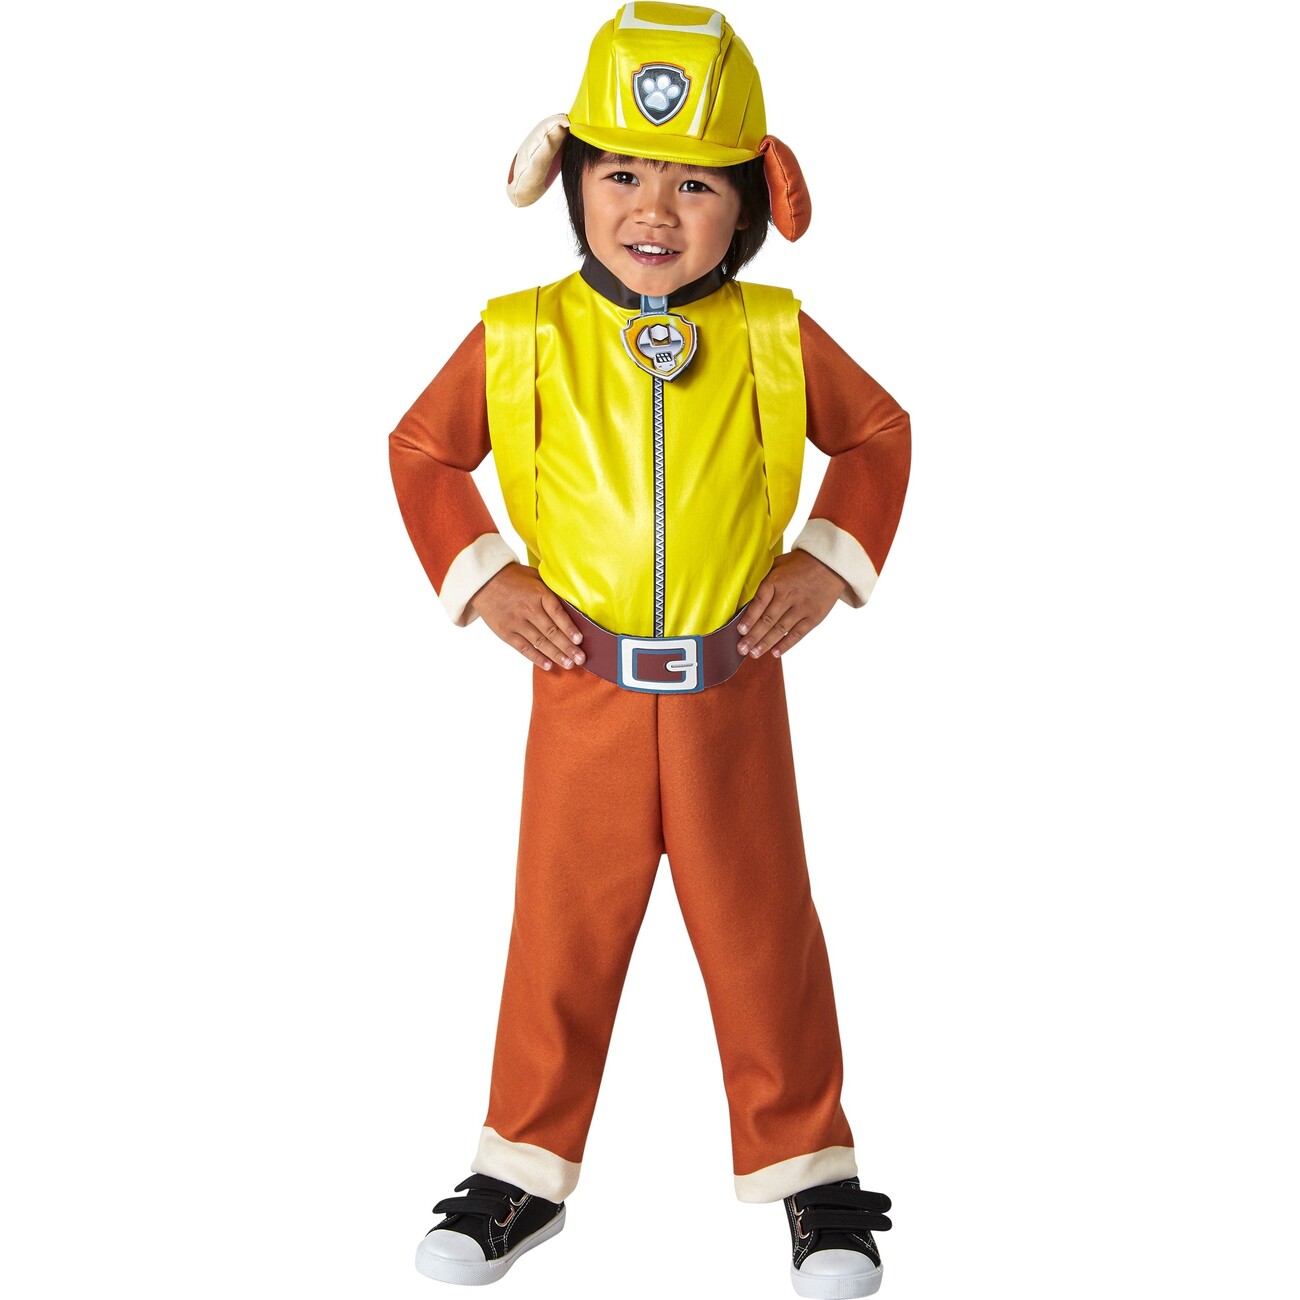 Paw Patrol Rubble Toddler Costume 2T